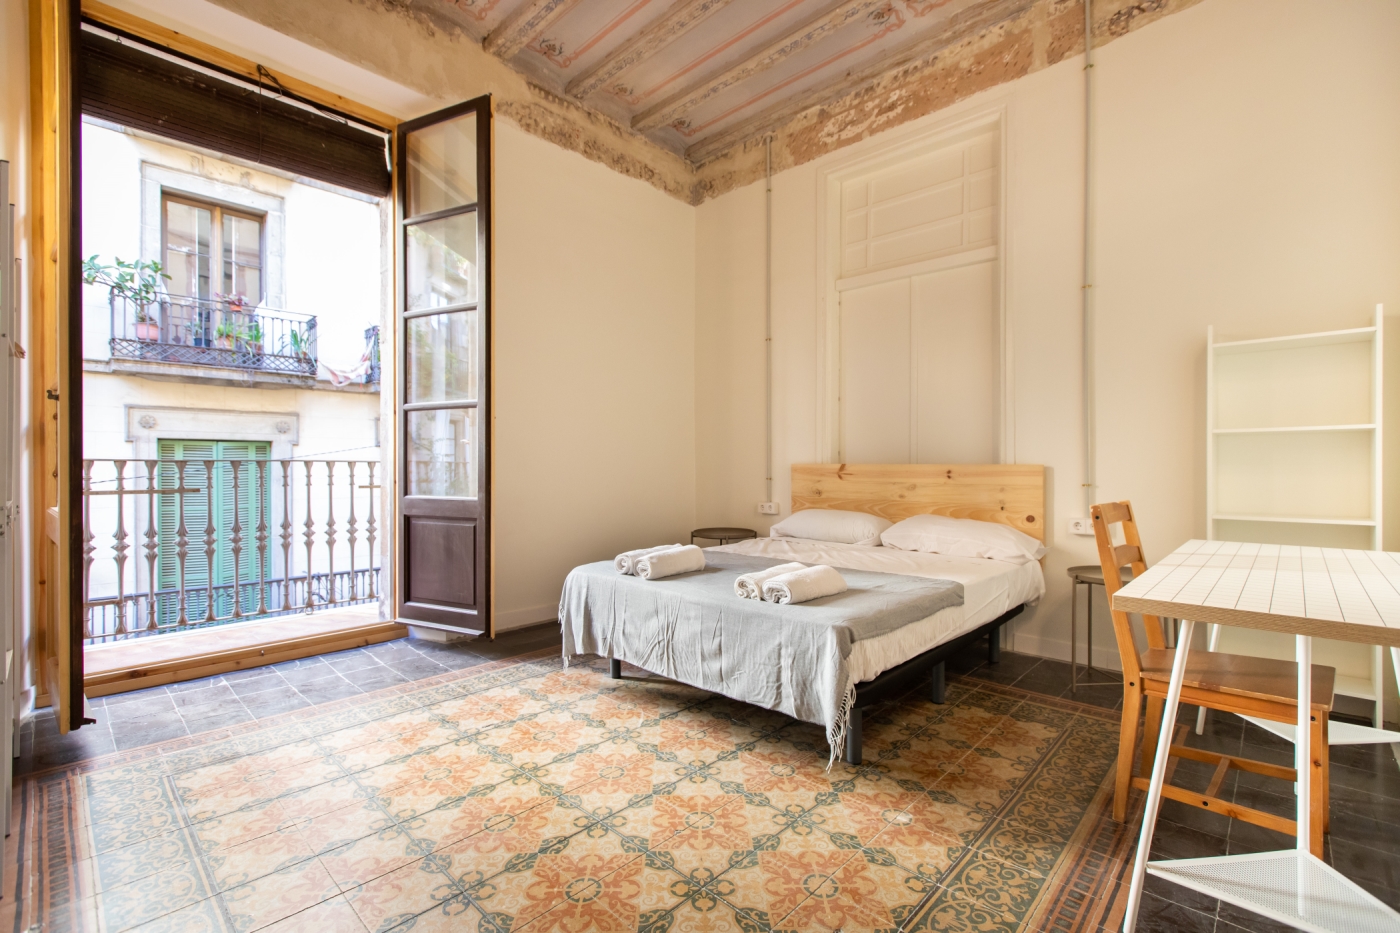 RENOVATED AND SPACIOUS APARTMENT in Barcelona